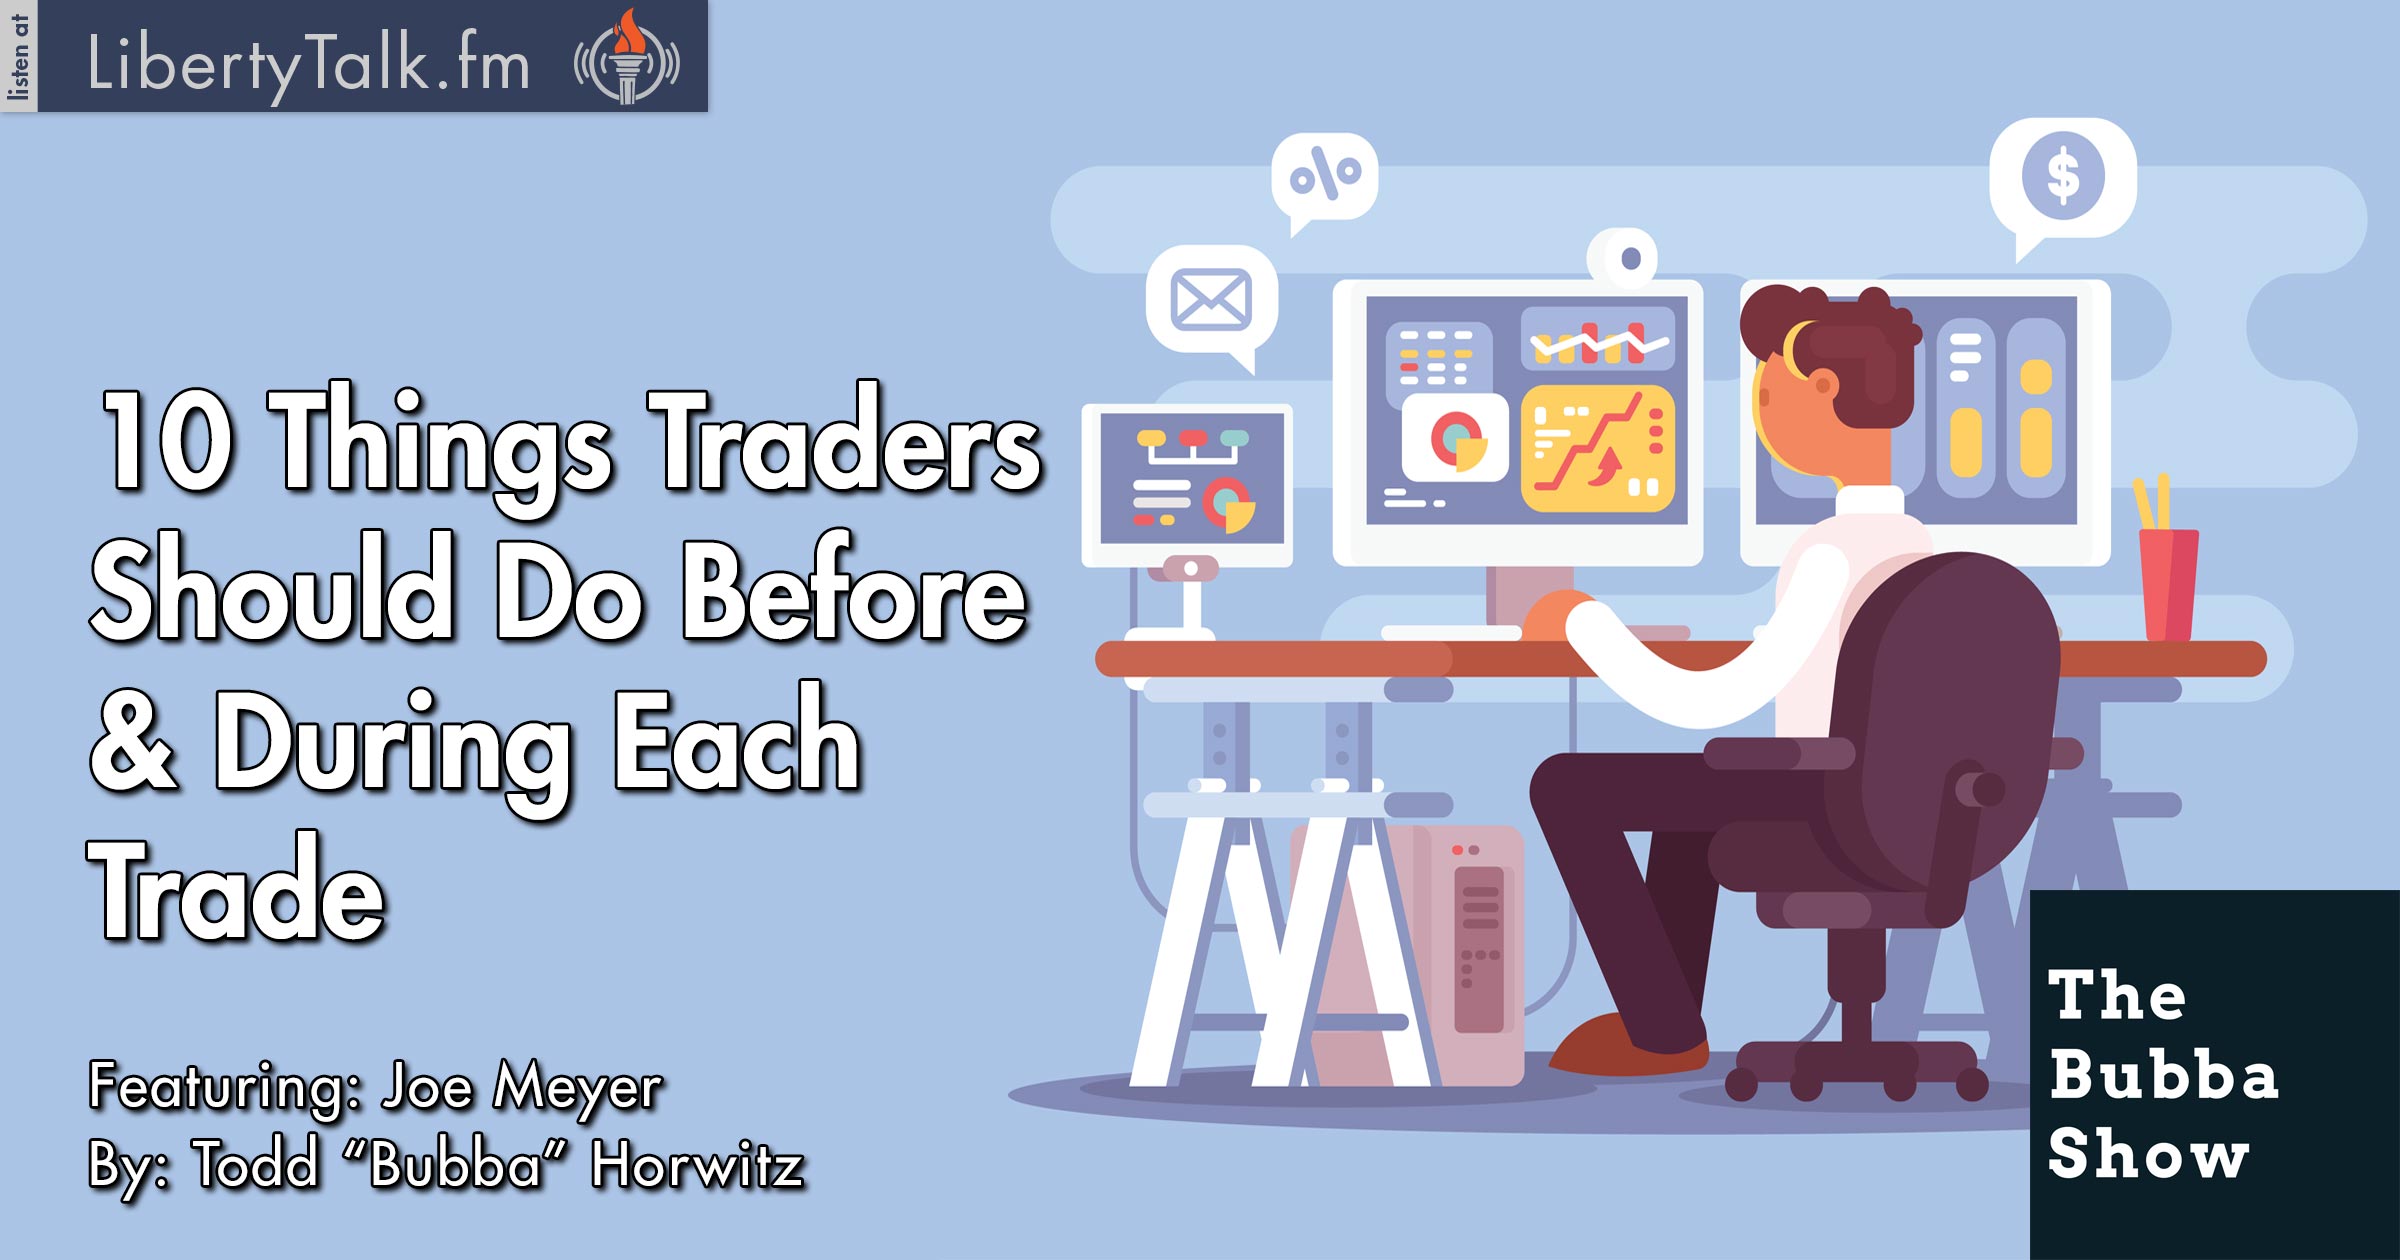 Ten Things Traders Should Do Before and During Each Trade - Bubba Show